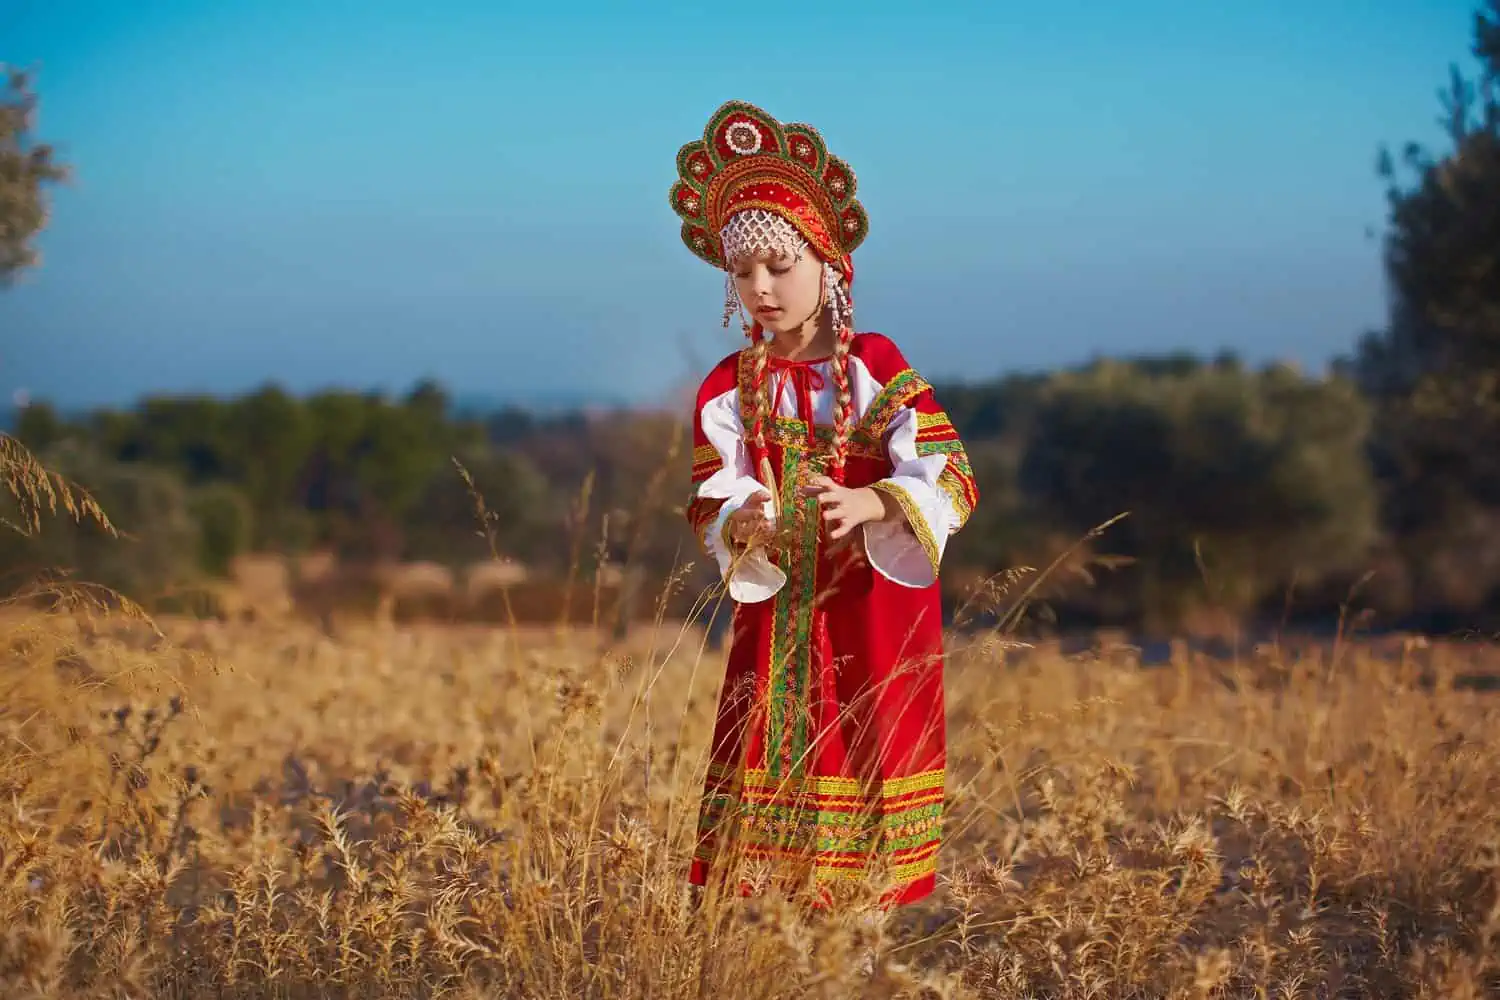 Russian young girl wearing their traditional costume standing in autumn meadow